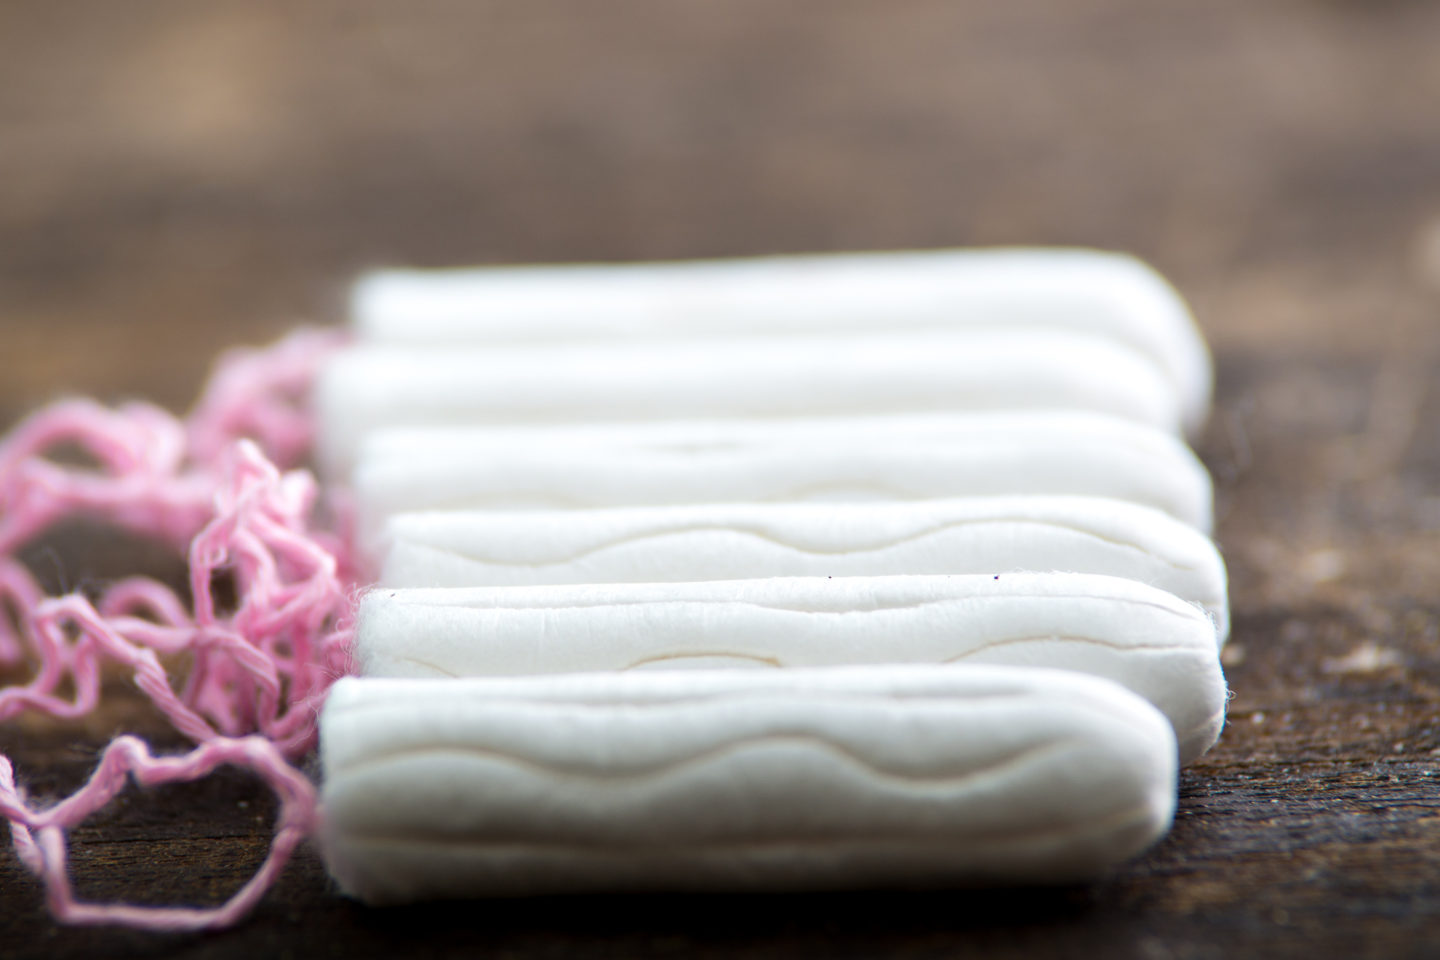 How Working In An Environment That Provided Free Feminine Hygiene Products Impacted My Career